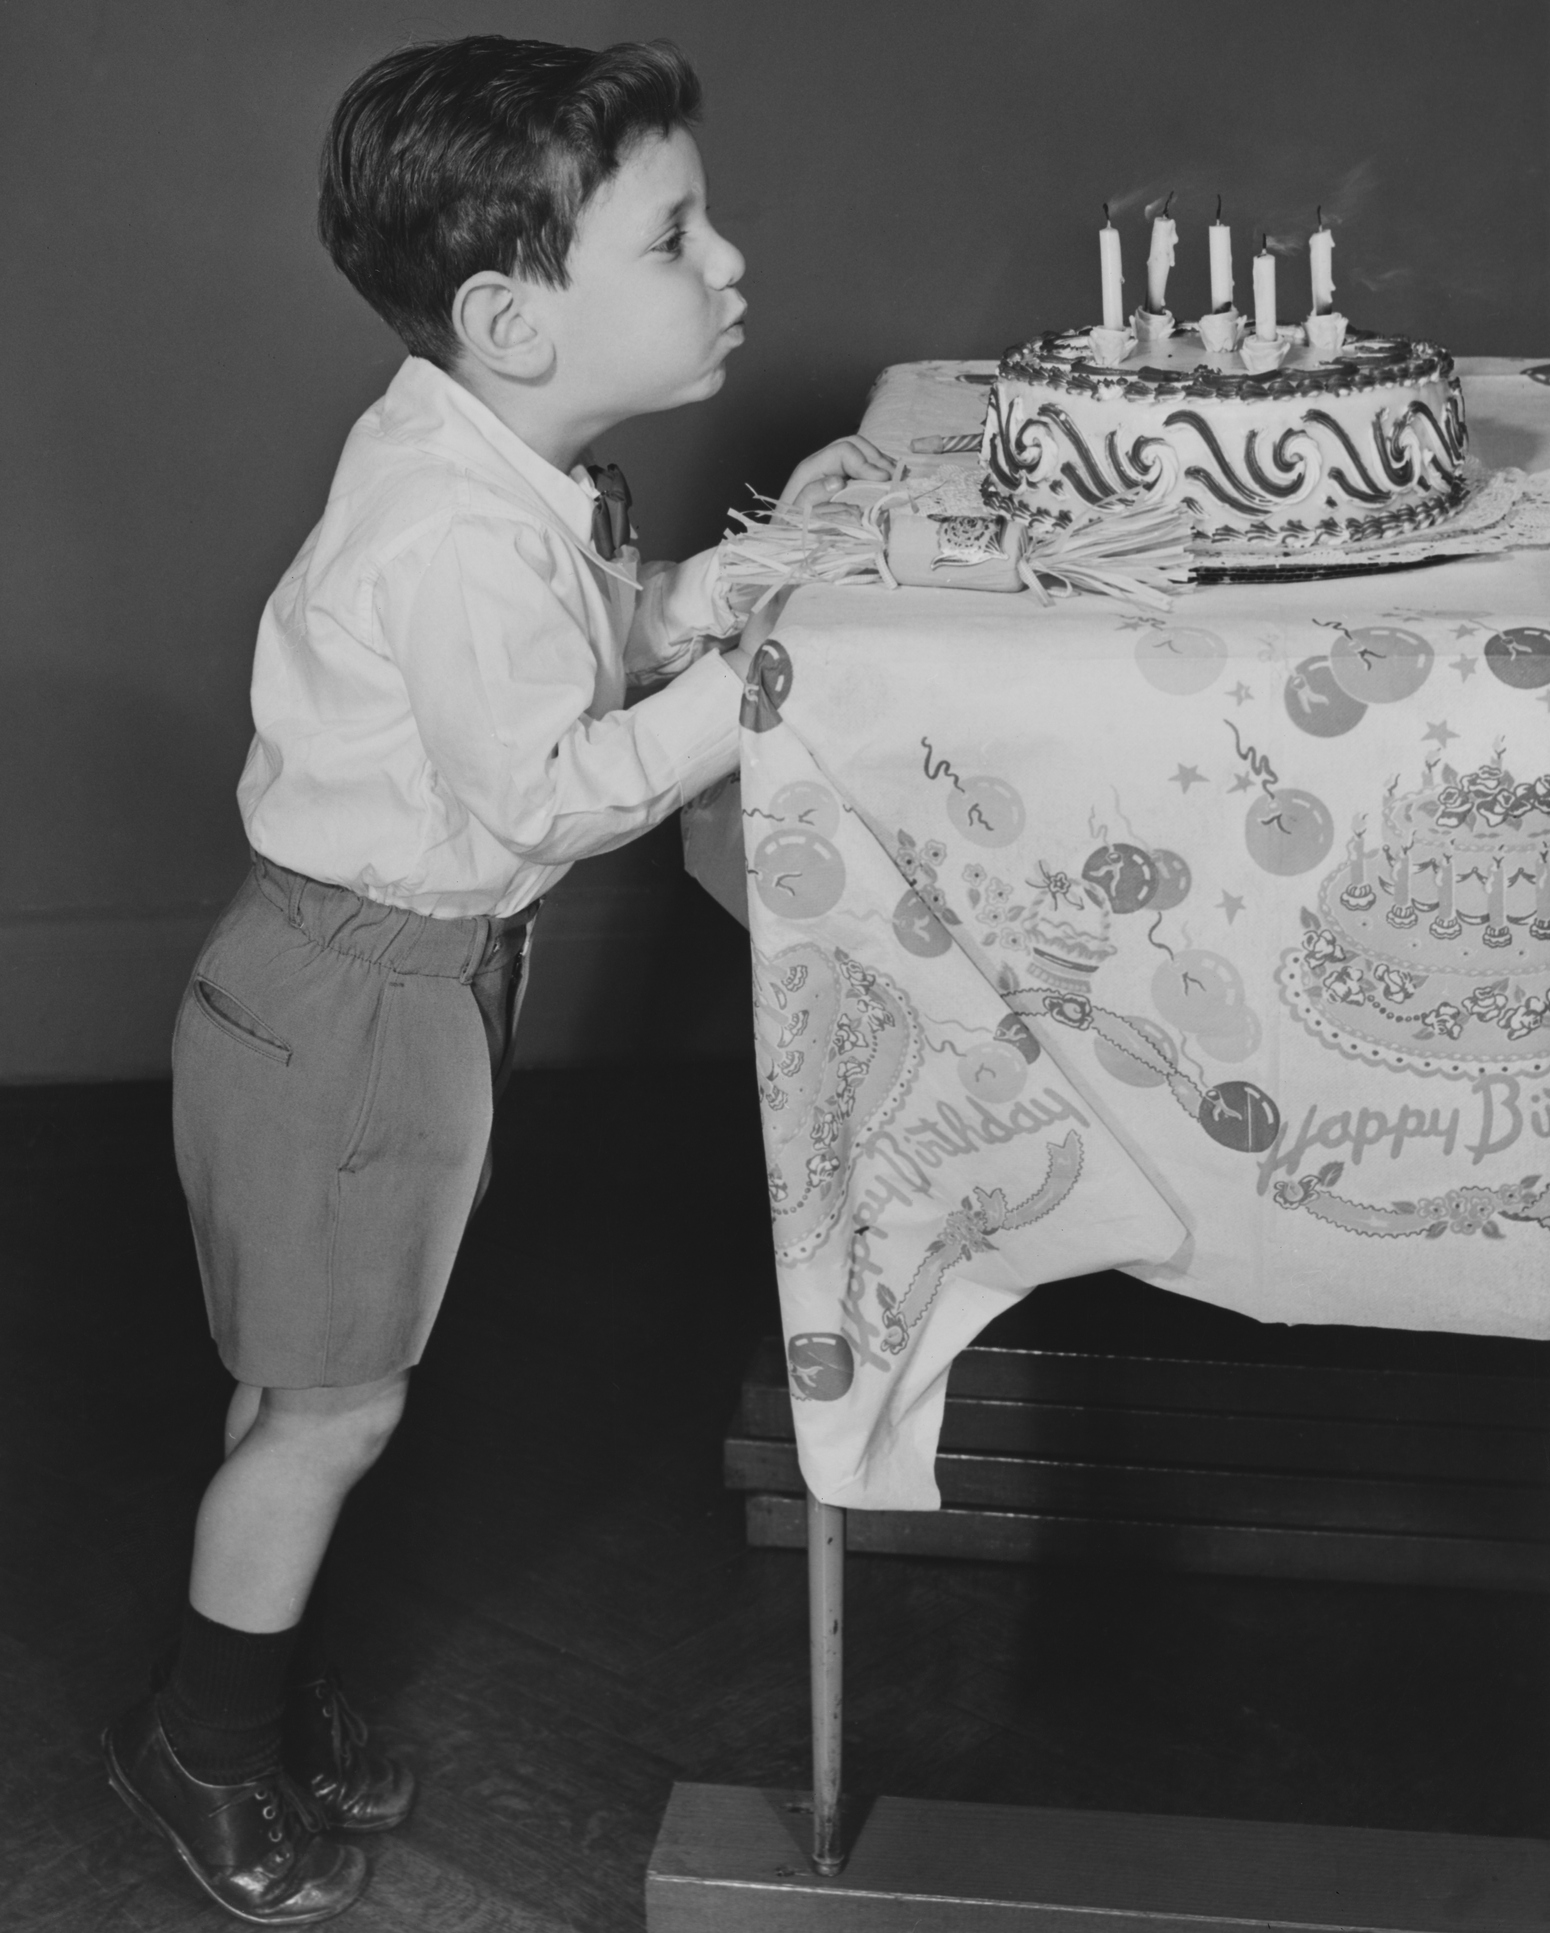 photo of boy blowing out candles - circa 1950